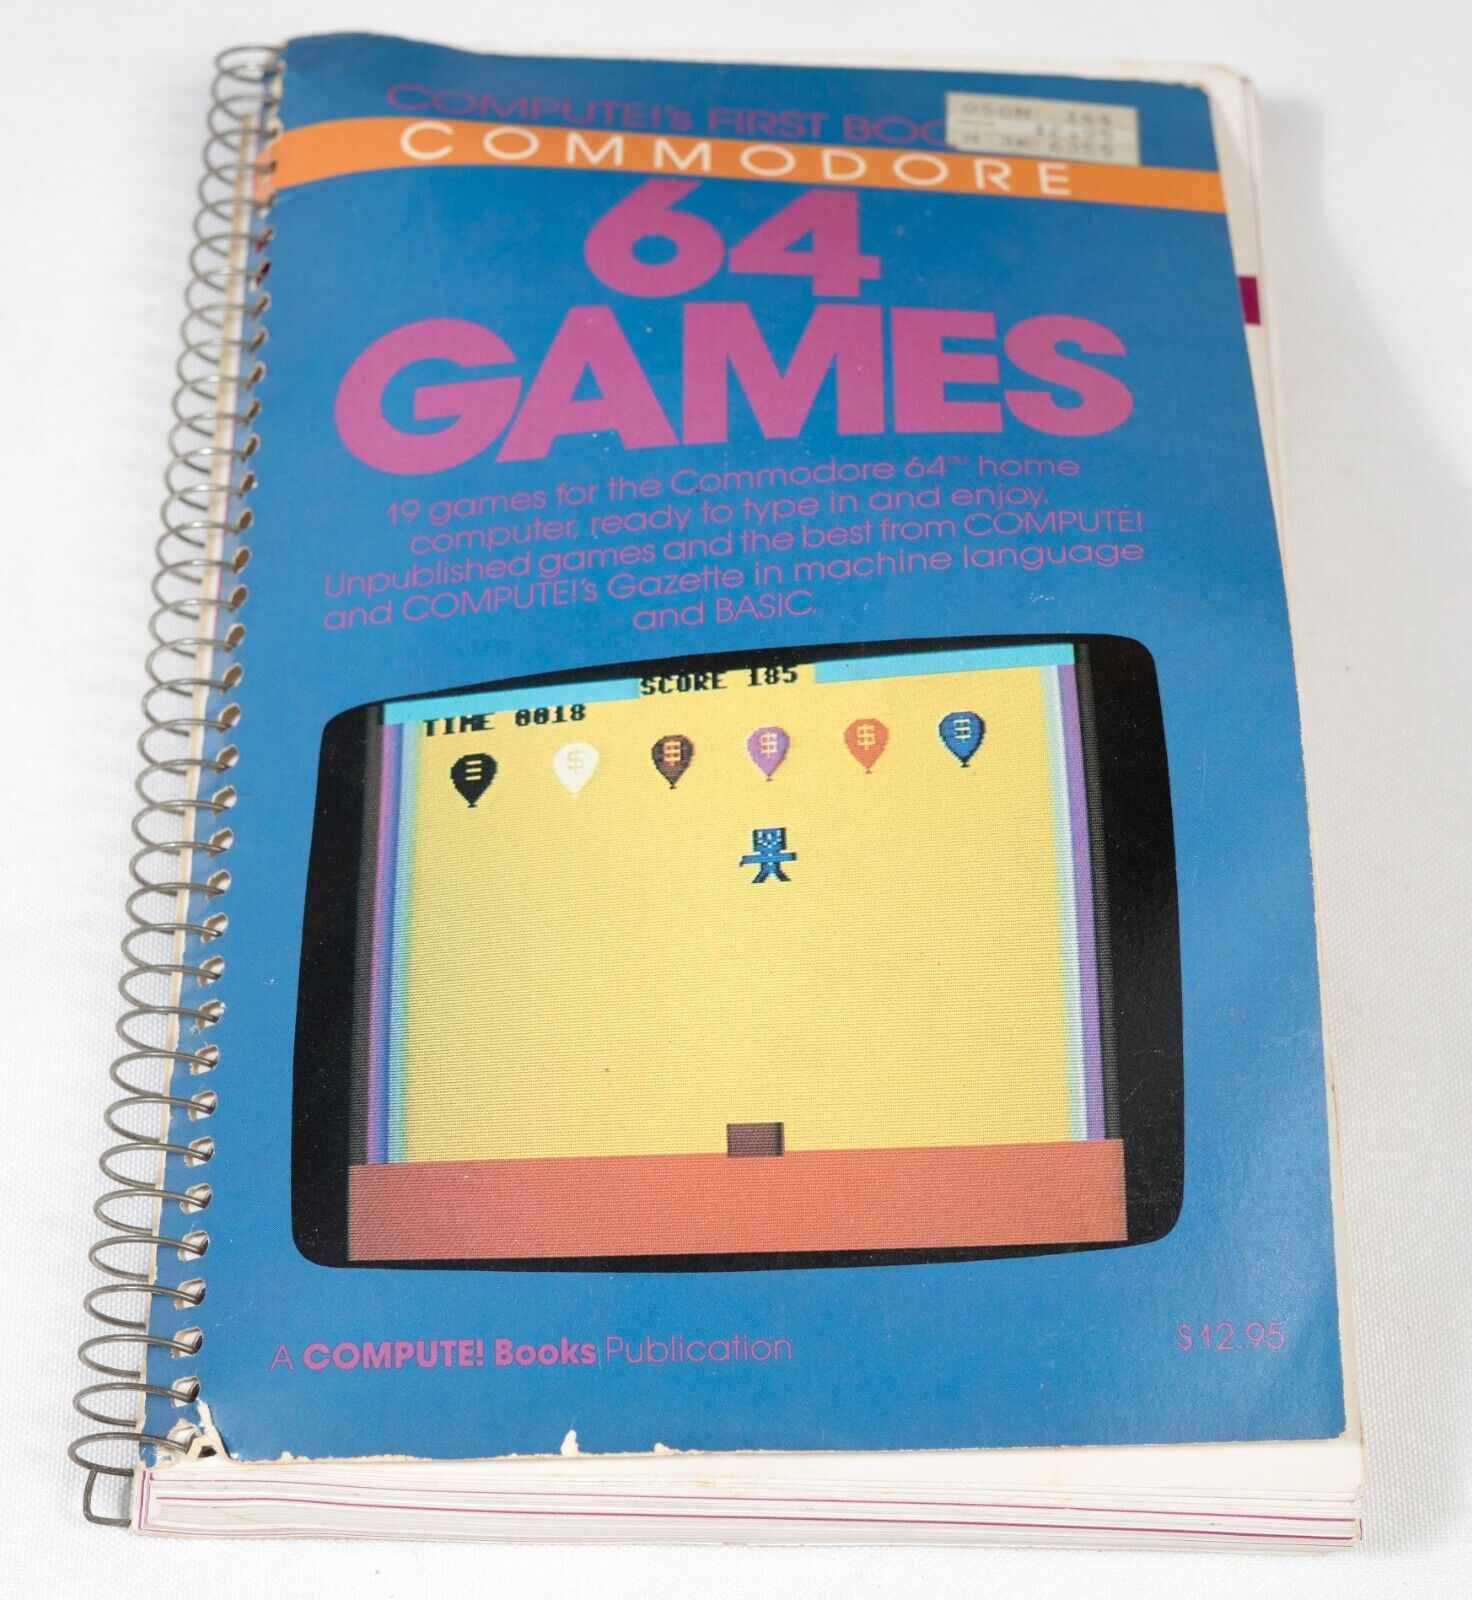 Vintage Compute Commodore 64 Games book ST534